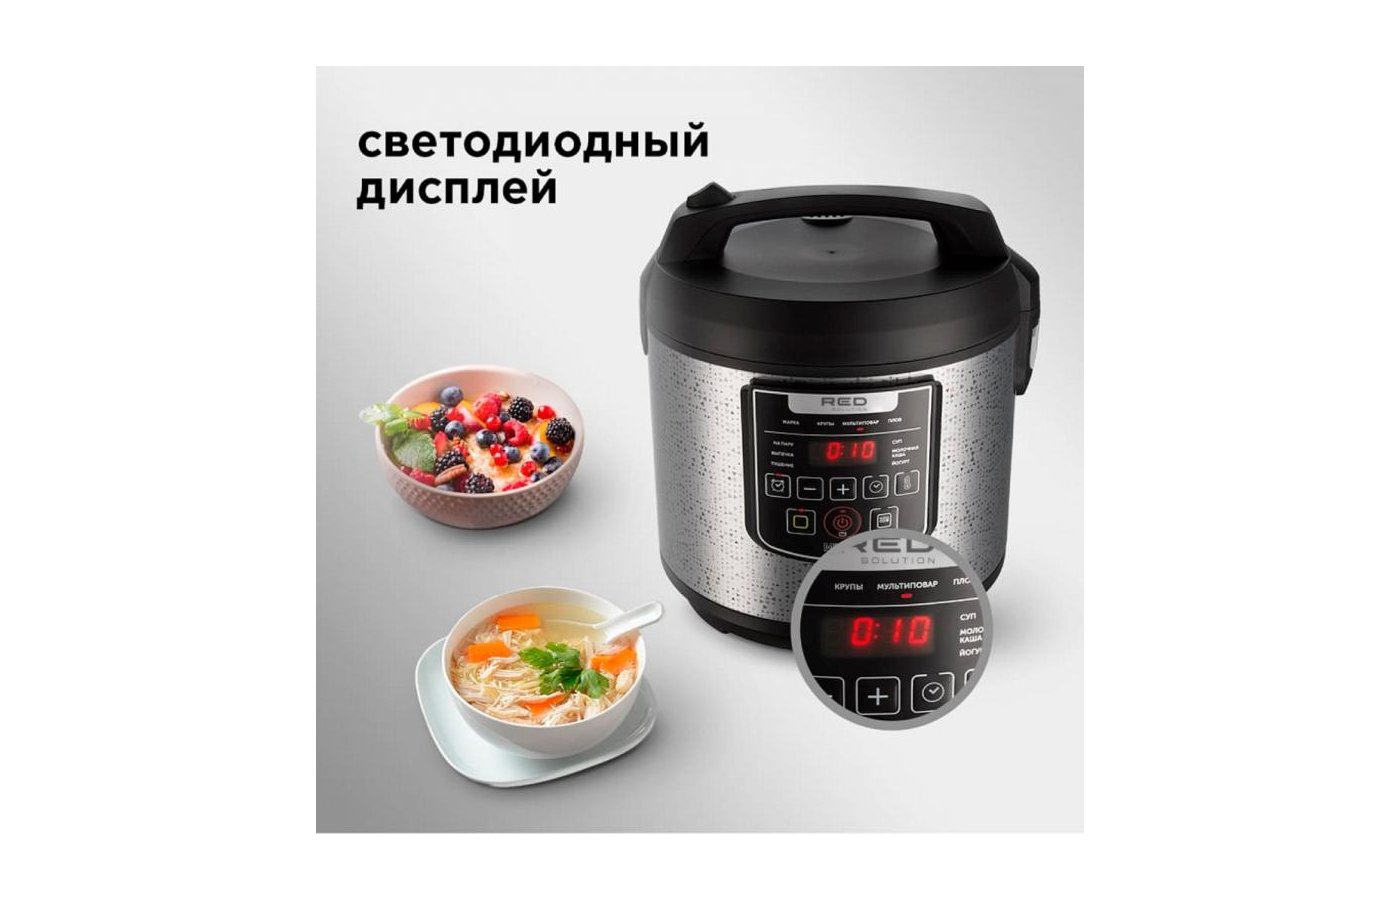 Мультиварка Red solution COLORCOOK RMC-88. Мультиварка Red solution RMC-88. Мультиварка Red solution RMC-m04. Мультиварка red solution rmc m25